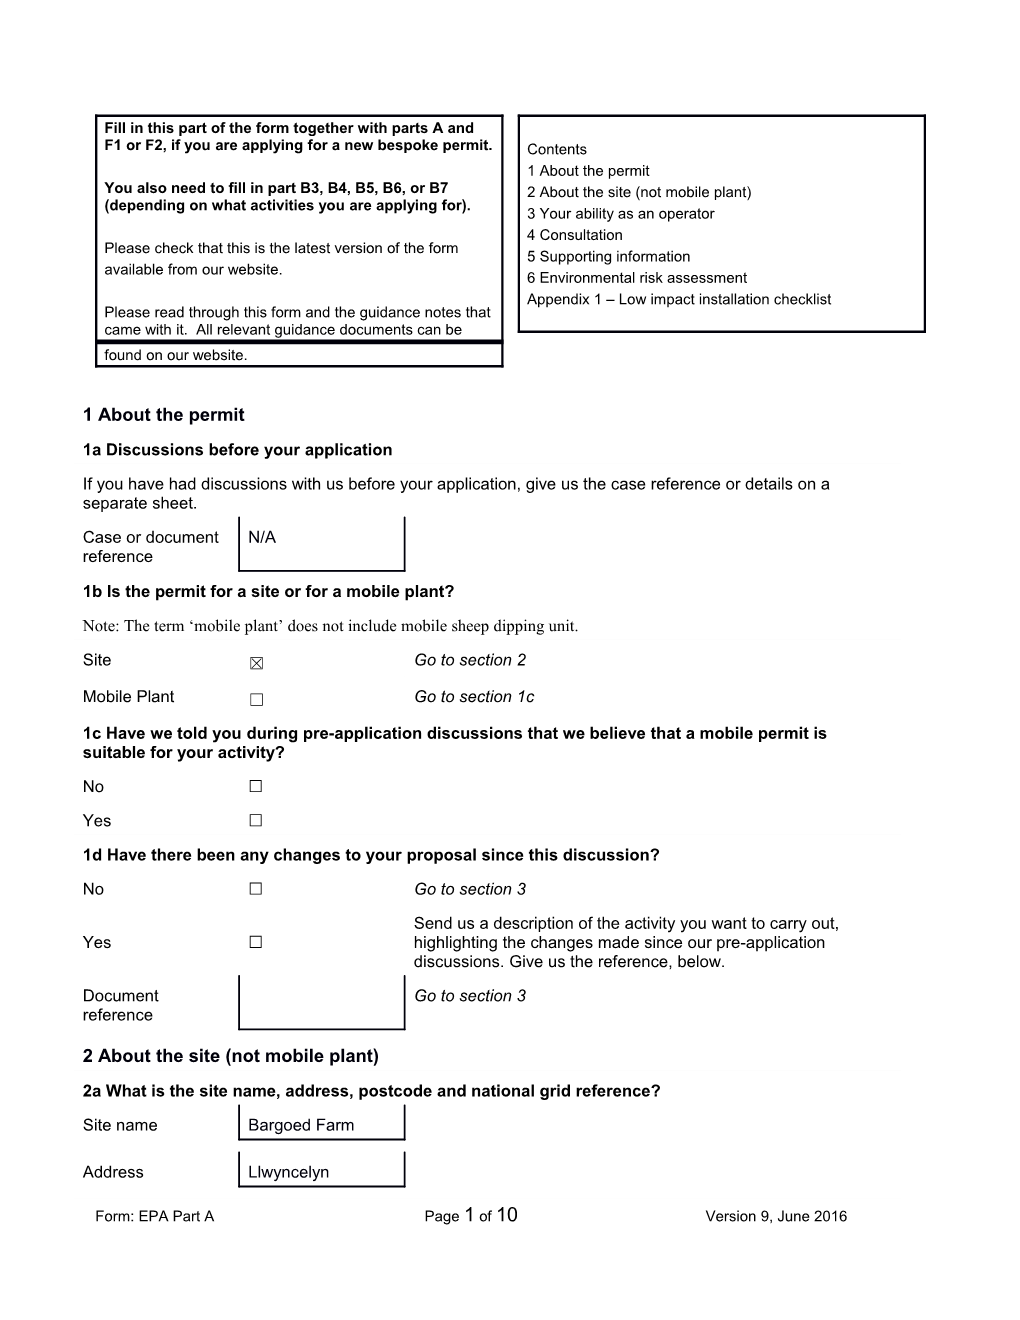 Please Check That This Is the Latest Version of the Form